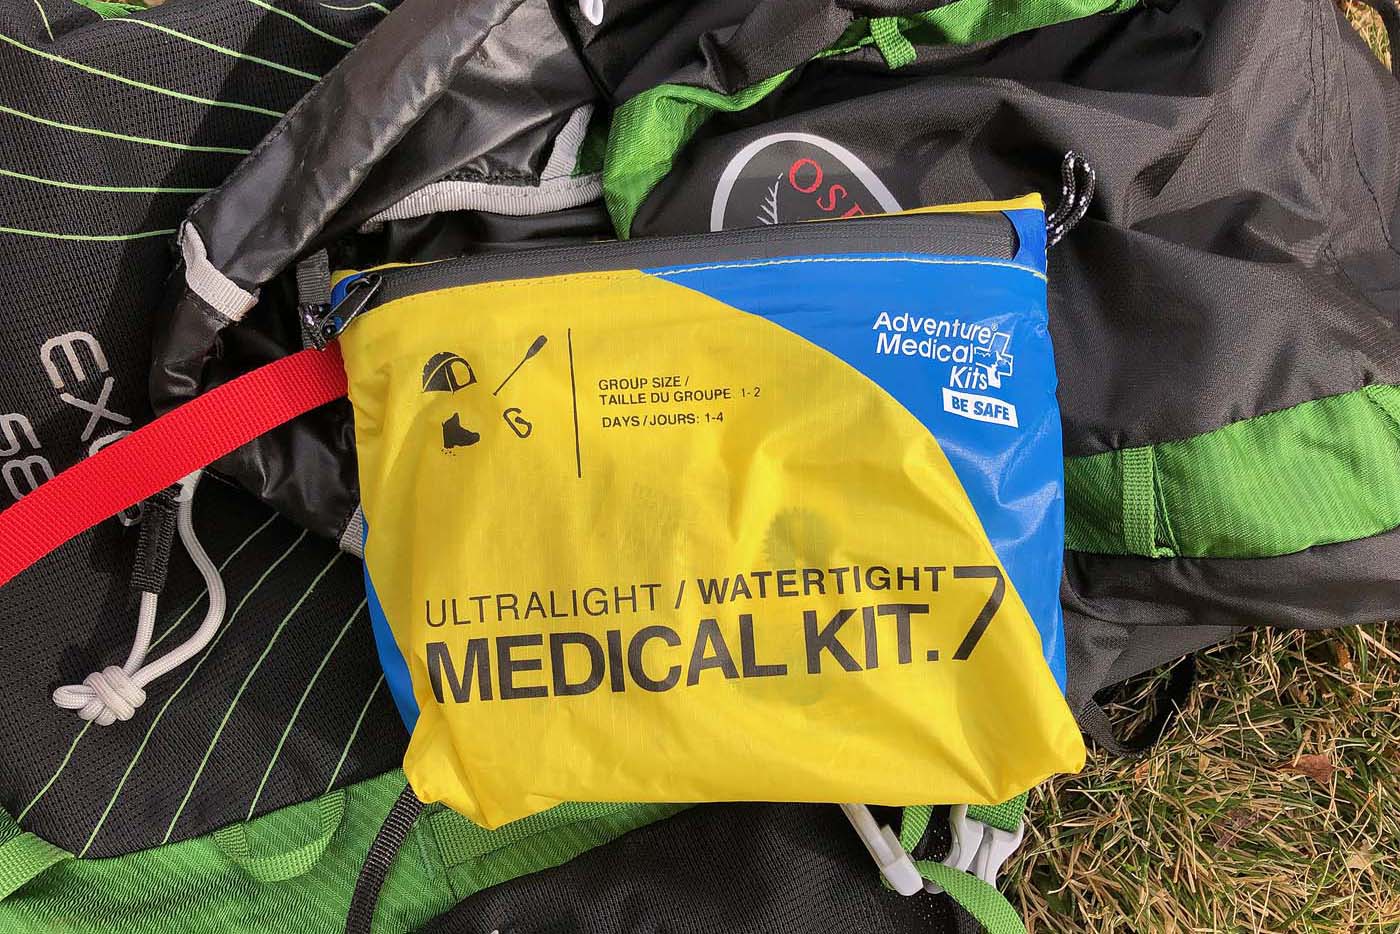 Packing for Emergencies: Backcountry First Aid Kit